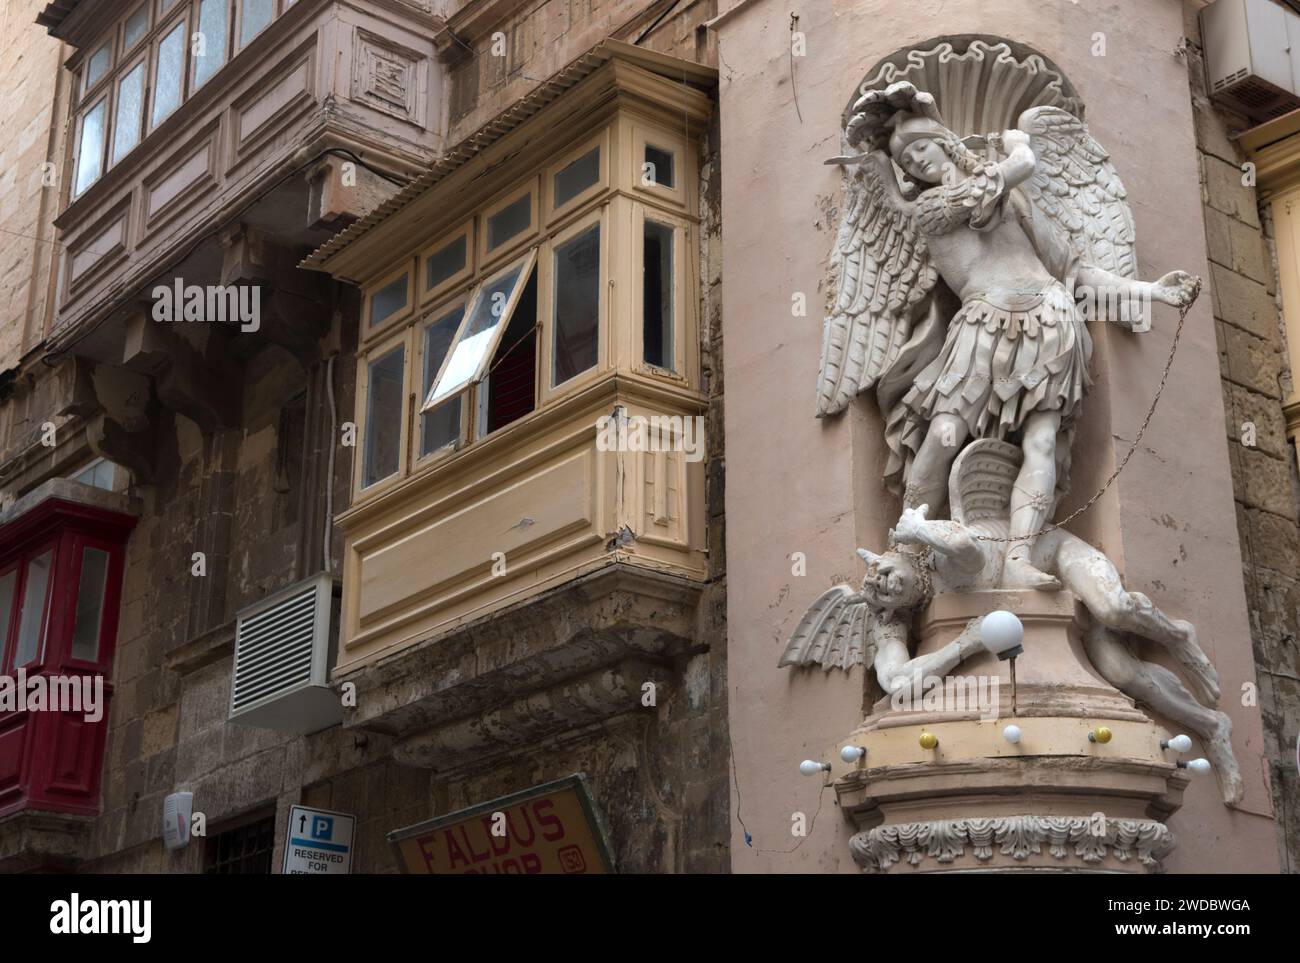 St Michael the Archangel slaying the devil who is lying at his feet. Statue frieze on buildings with covered balconies in Valletta, Malta  2024 2020s HOMER SYKES Stock Photo